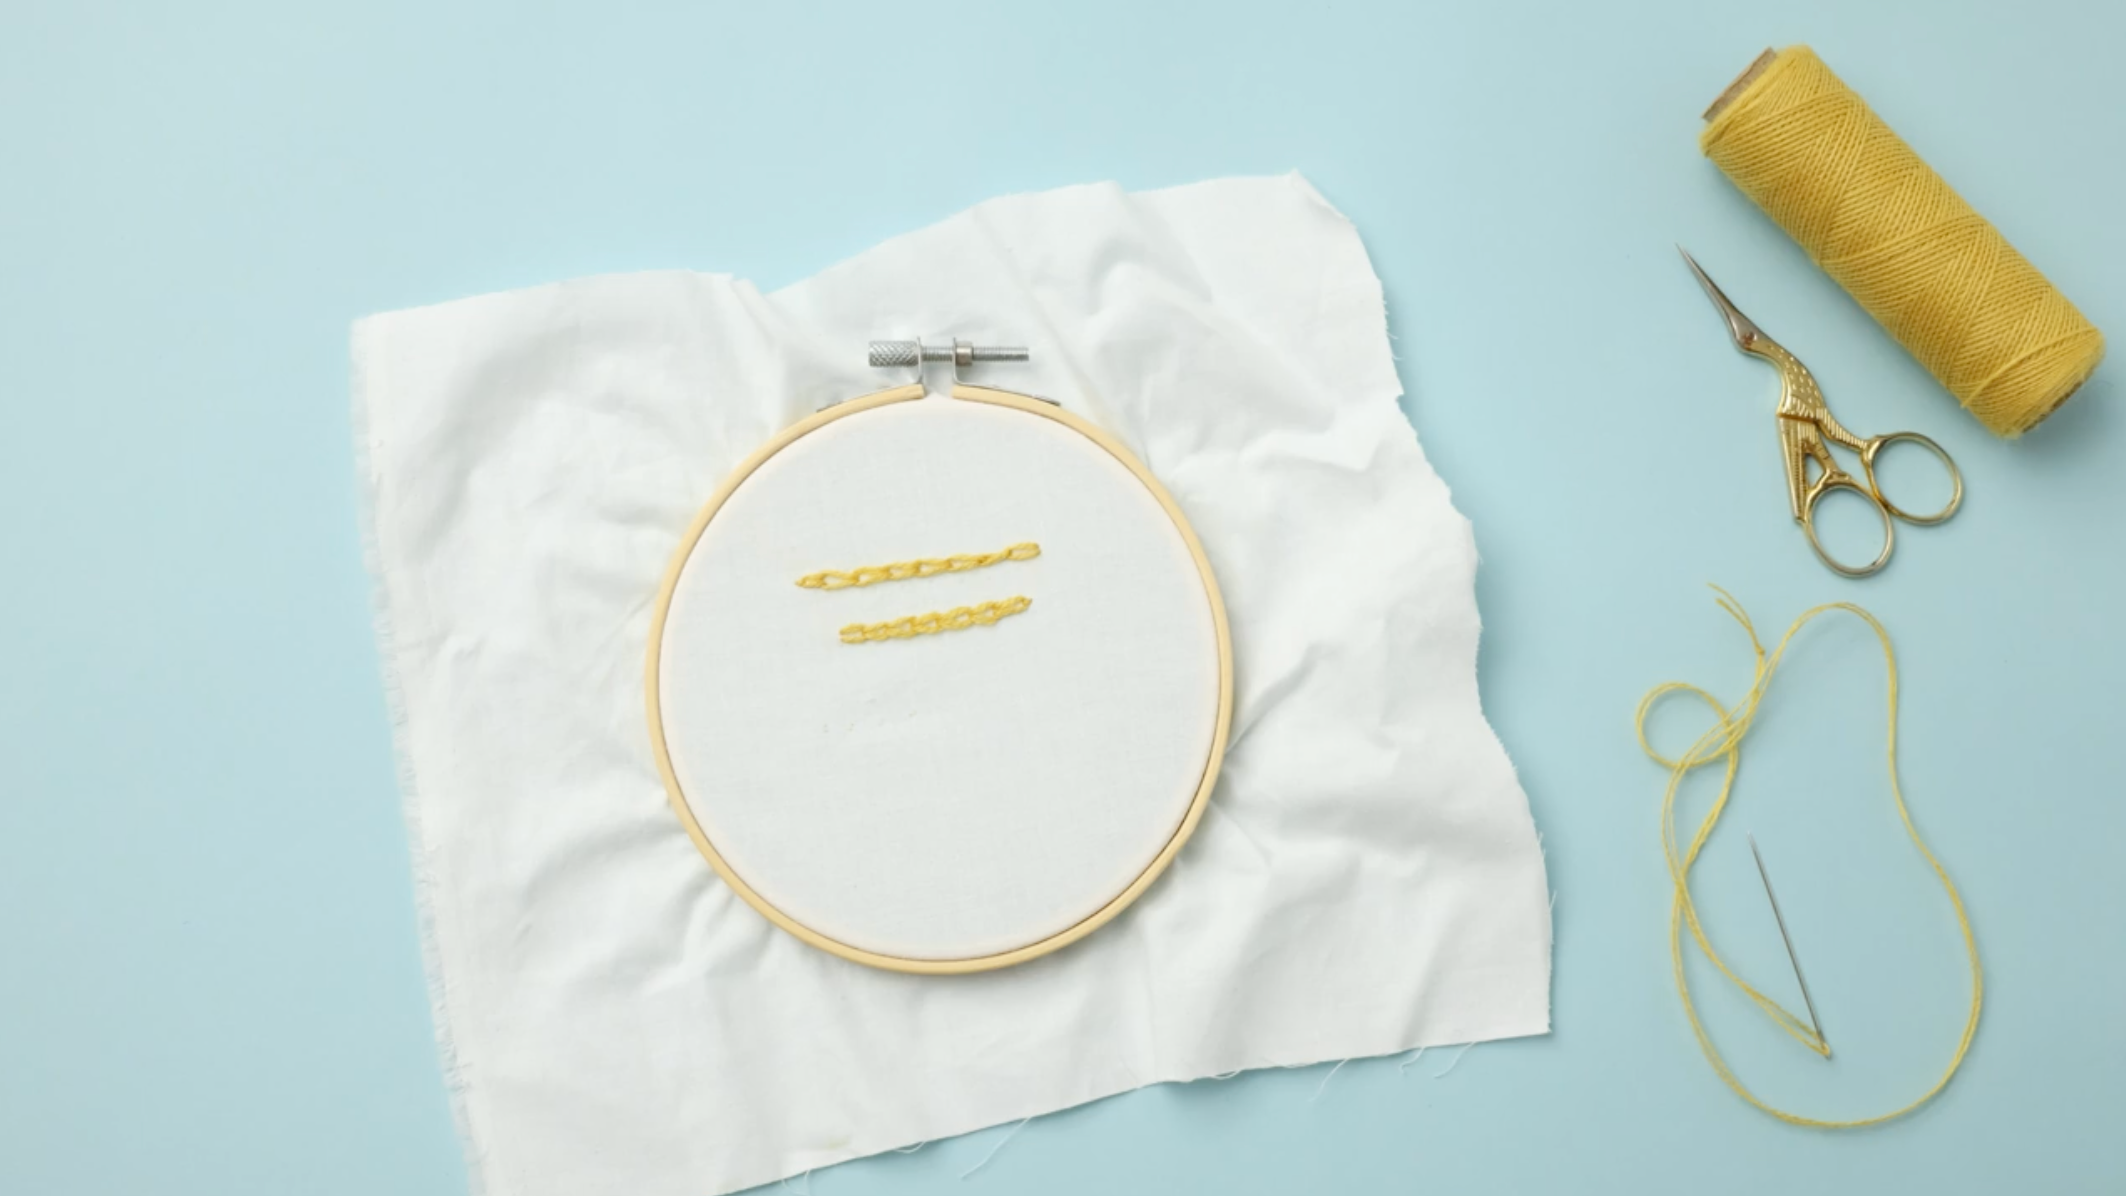 Chain Stitch Tutorial: Step-By-Step Embroidery Instructions